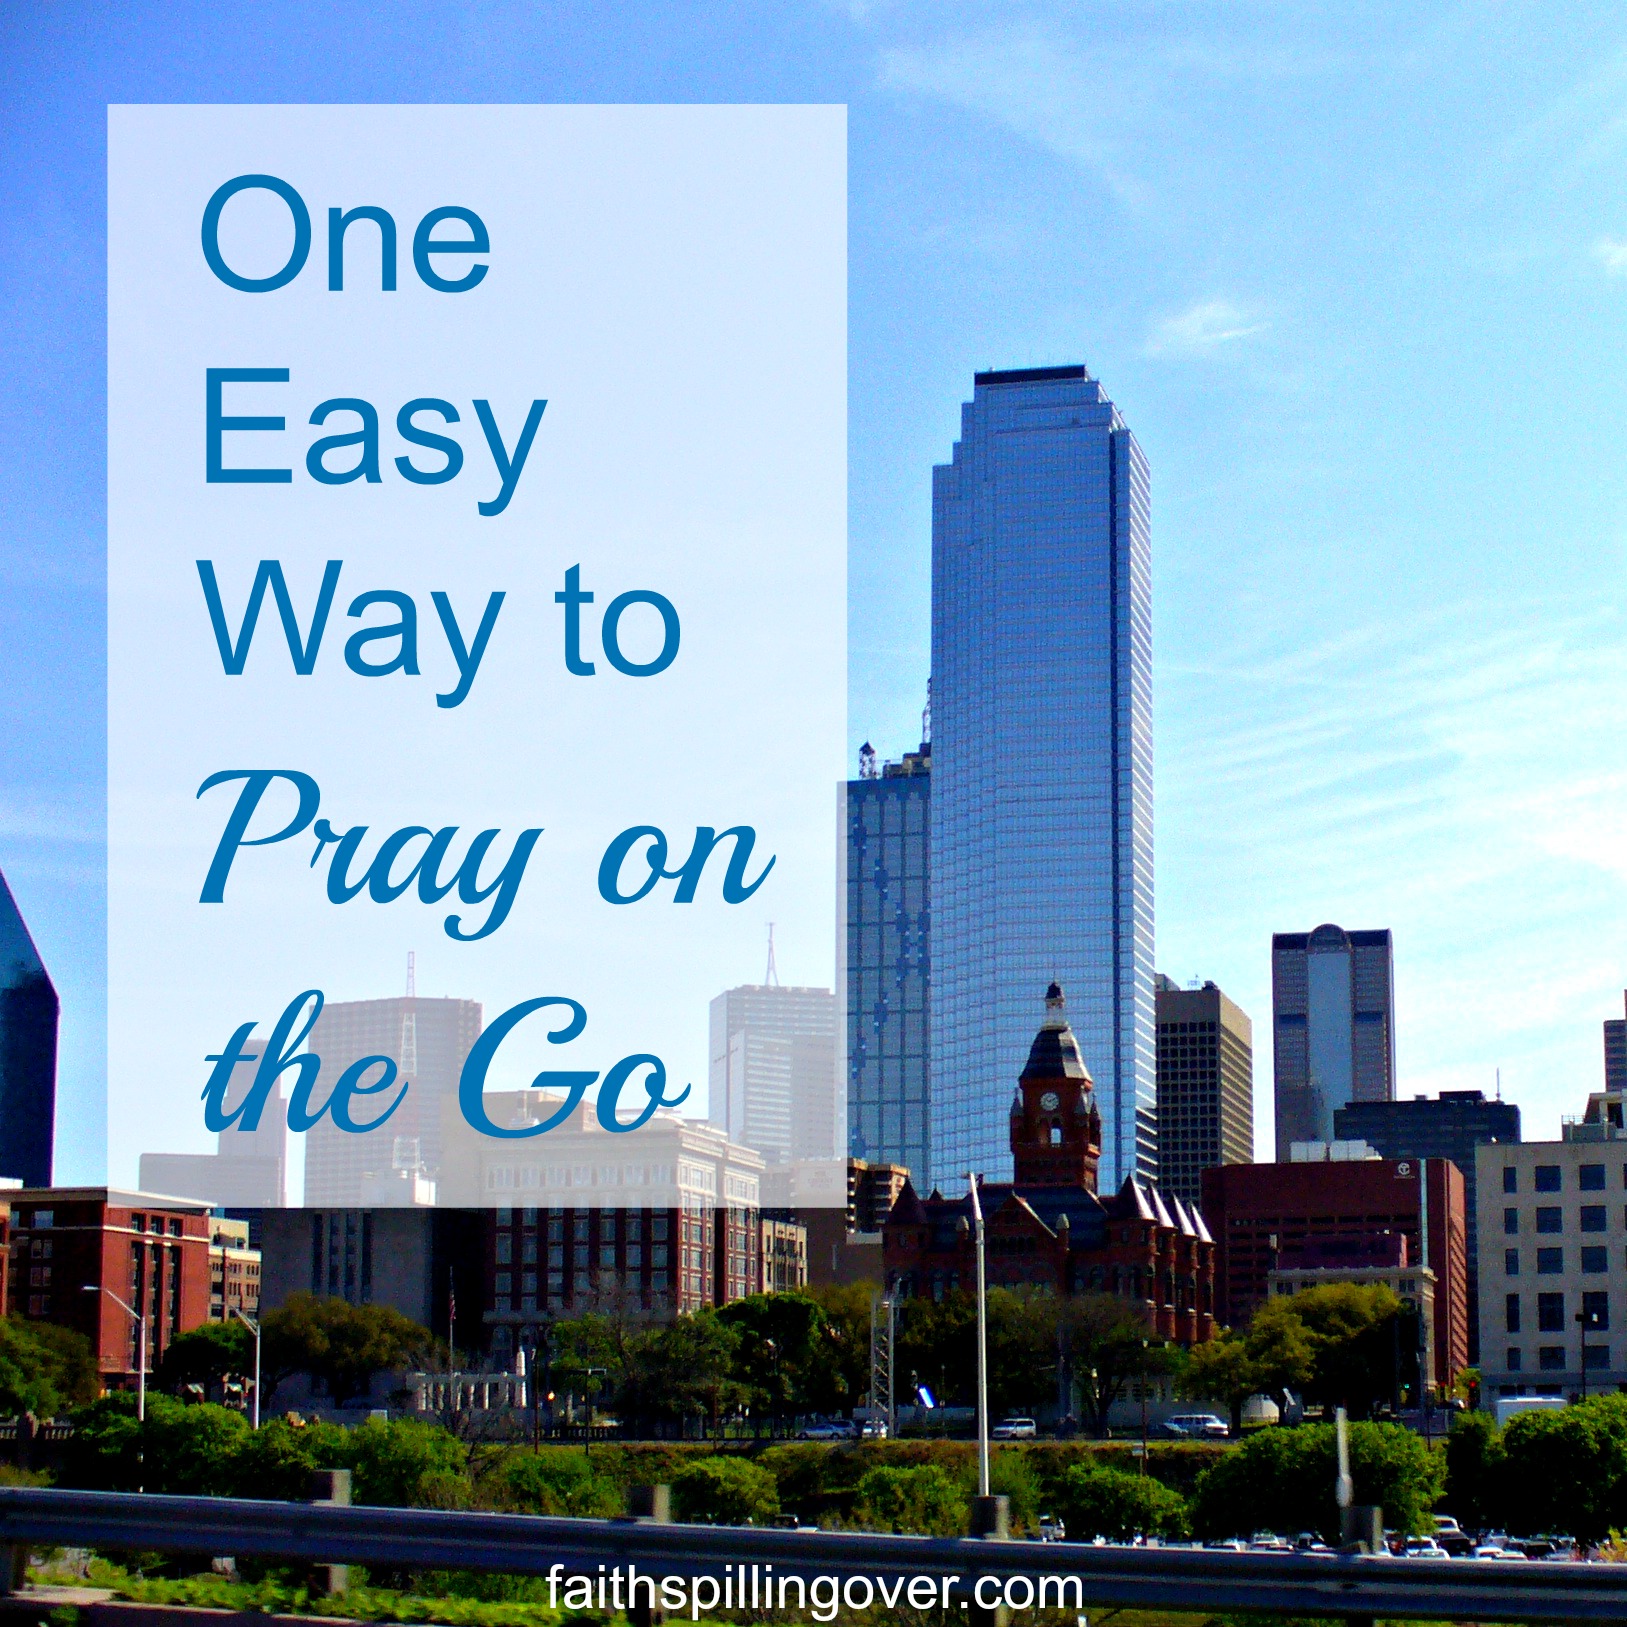 One Easy Way to Pray on the Go